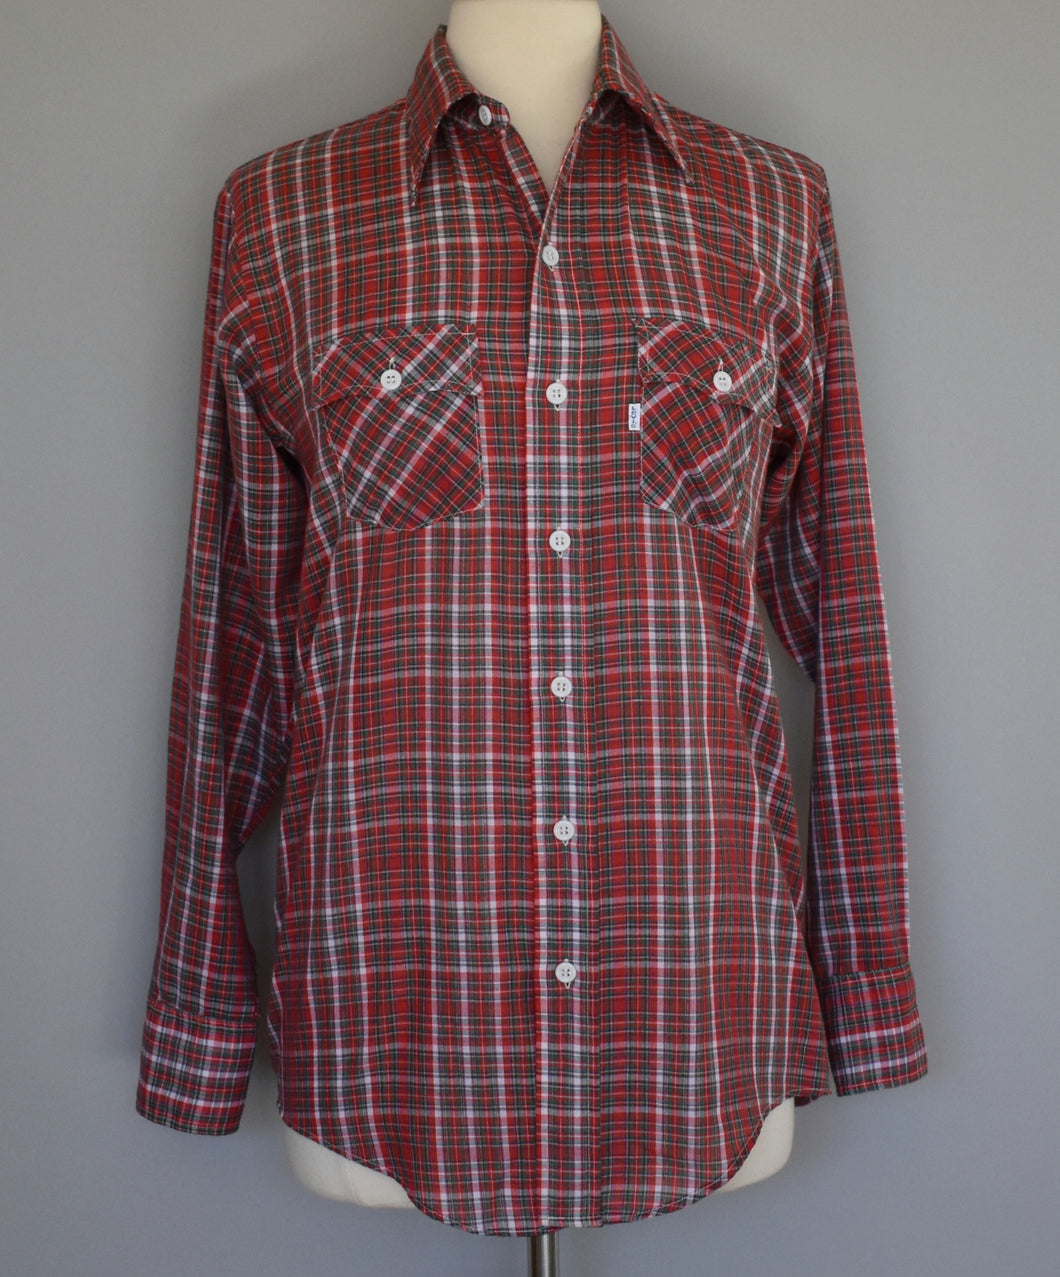 Vintage 70s Levi's Plaid Button Front Shirt Size Small to Medium